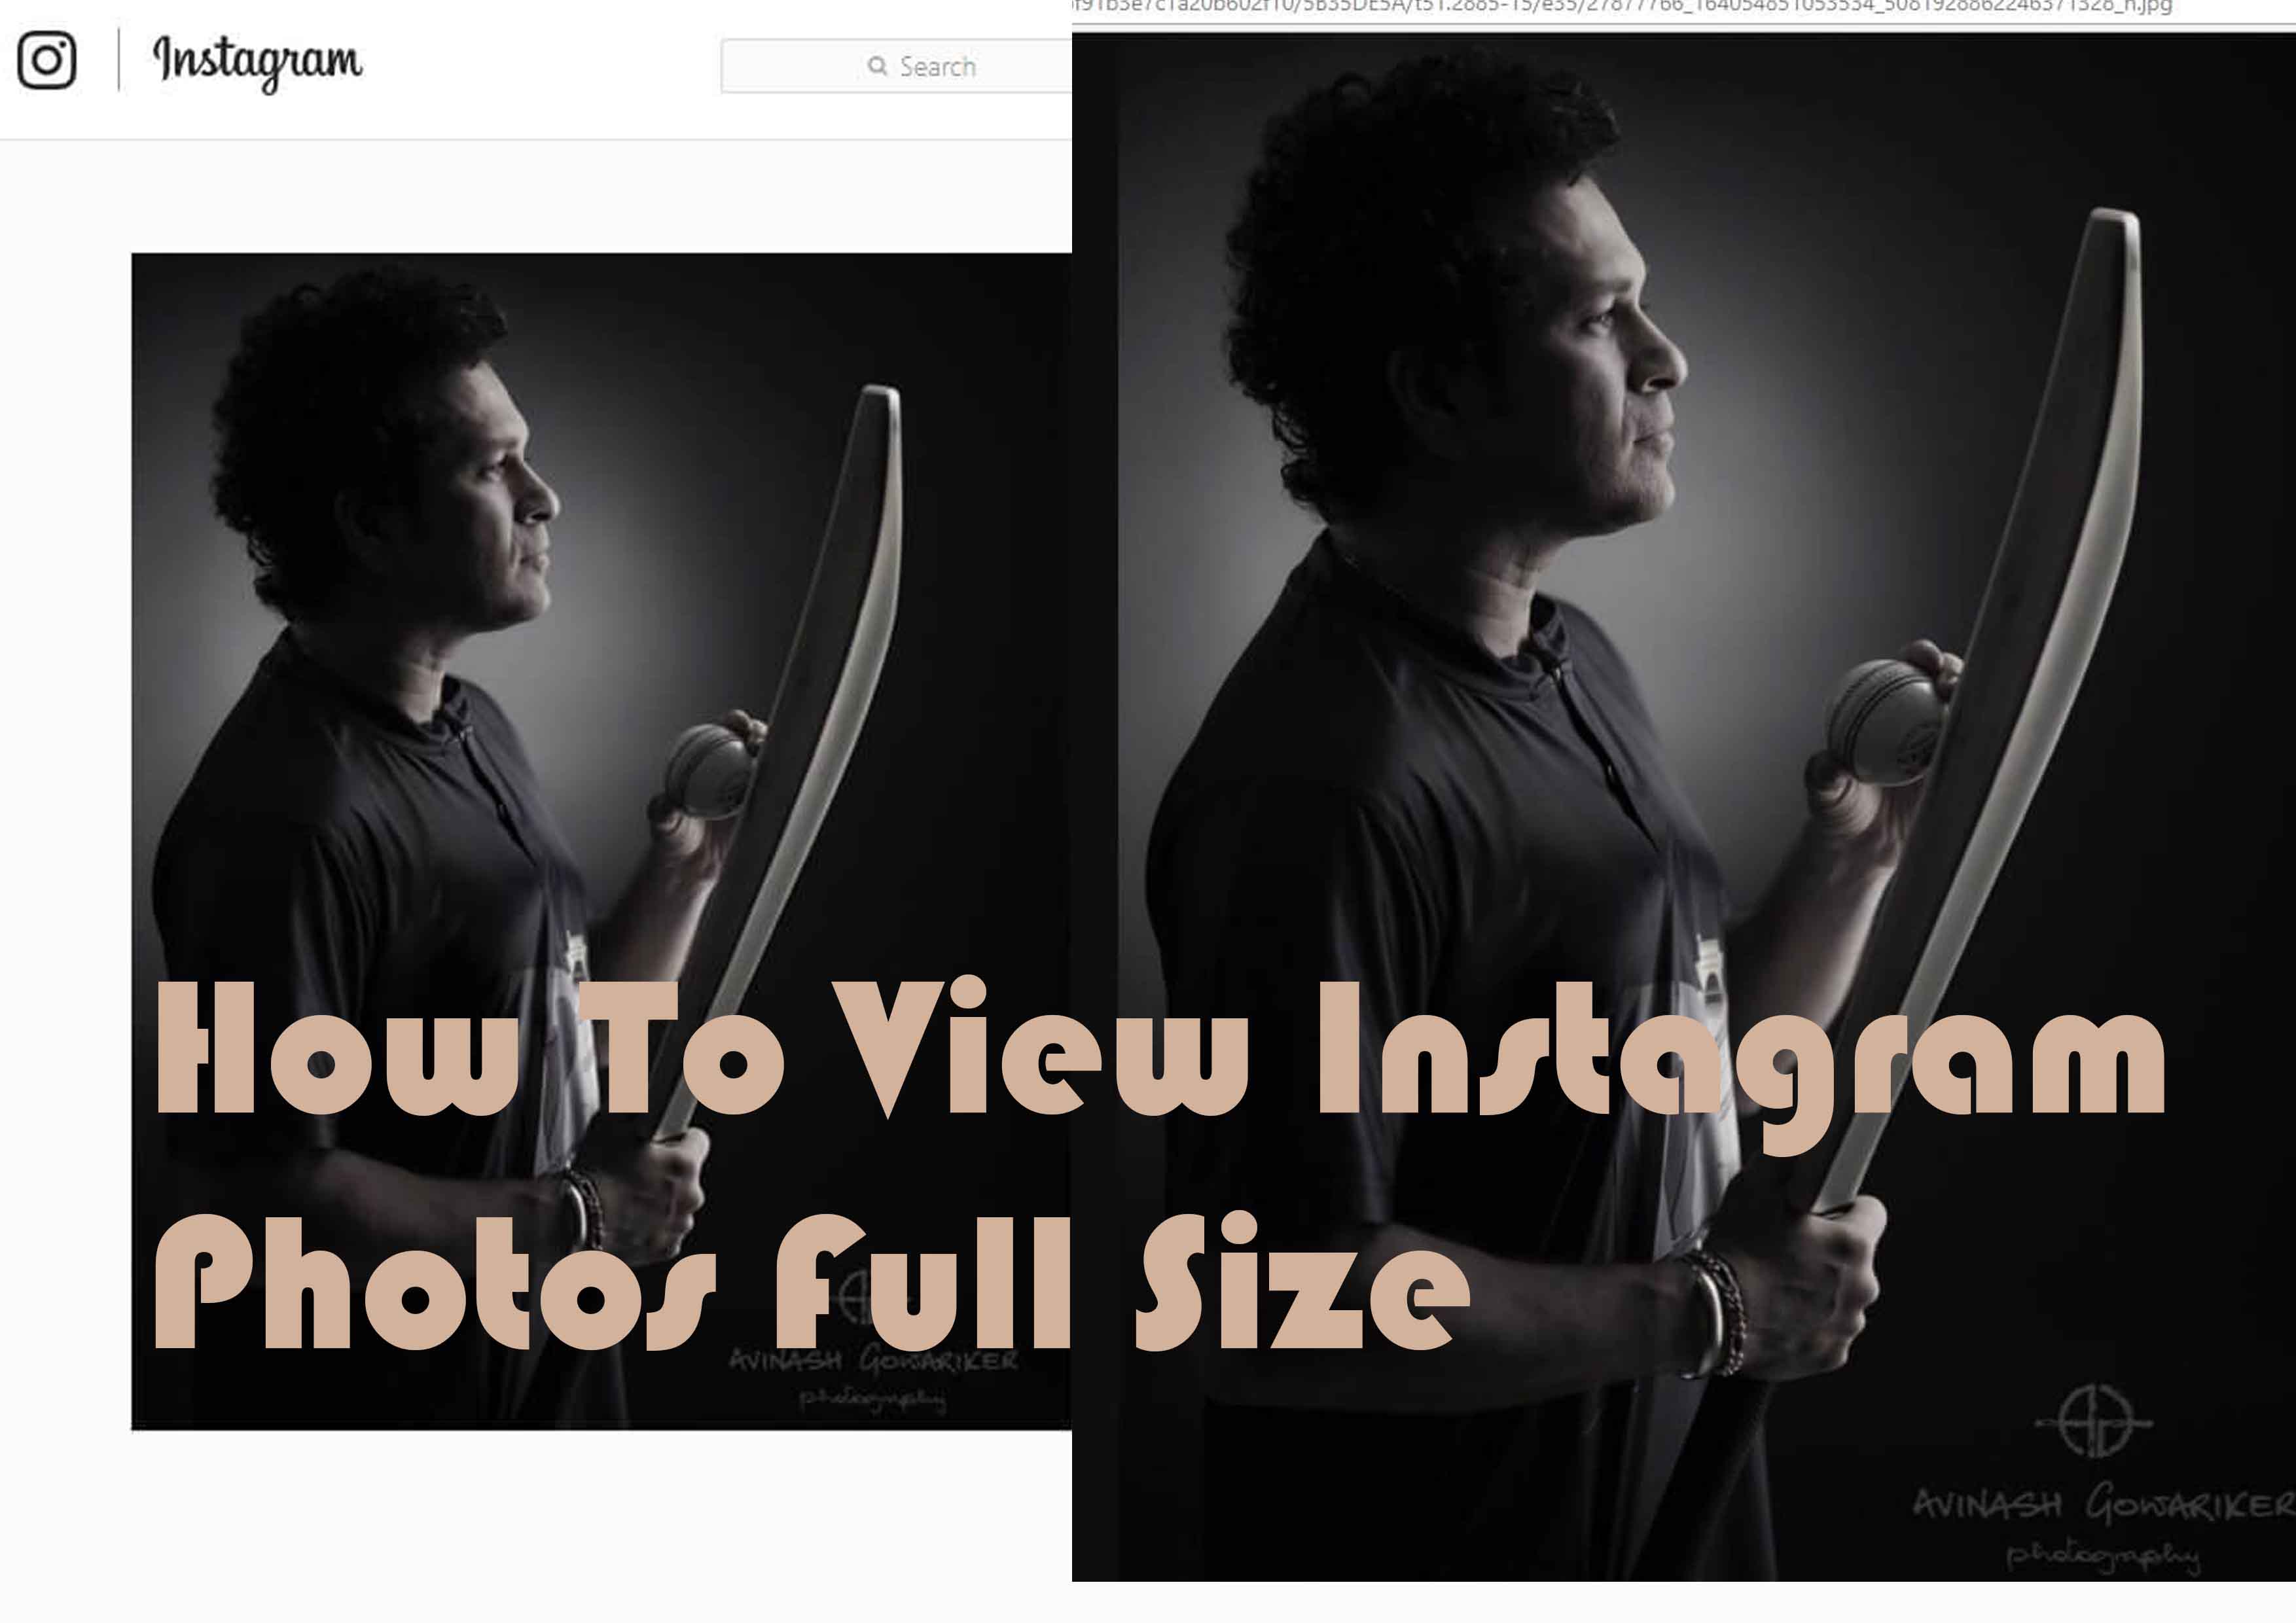 how to put full size pictures in instagram